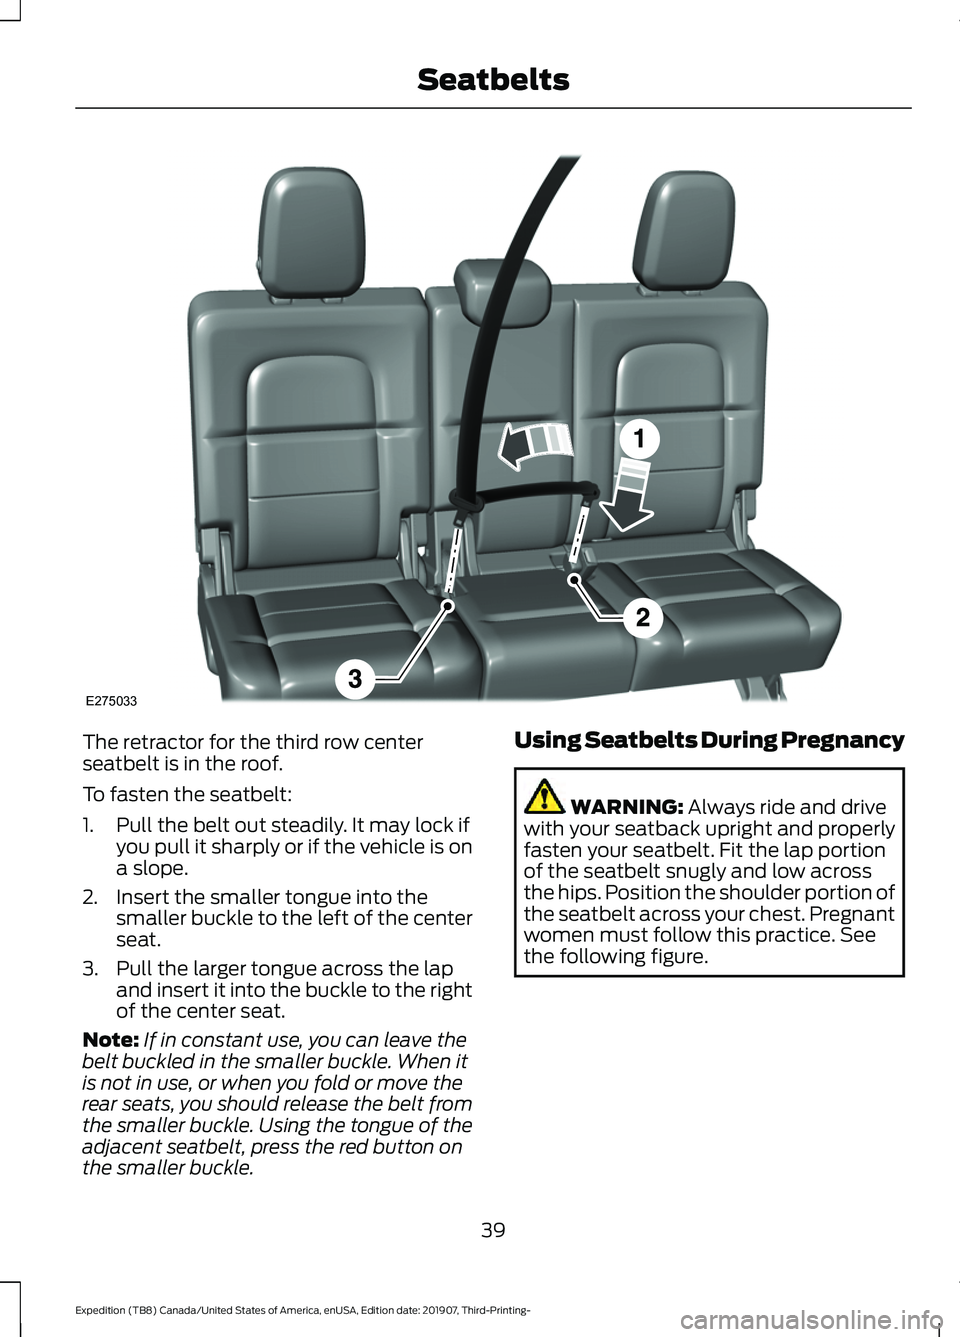 FORD EXPEDITION 2020  Owners Manual The retractor for the third row center
seatbelt is in the roof.
To fasten the seatbelt:
1. Pull the belt out steadily. It may lock if
you pull it sharply or if the vehicle is on
a slope.
2. Insert the